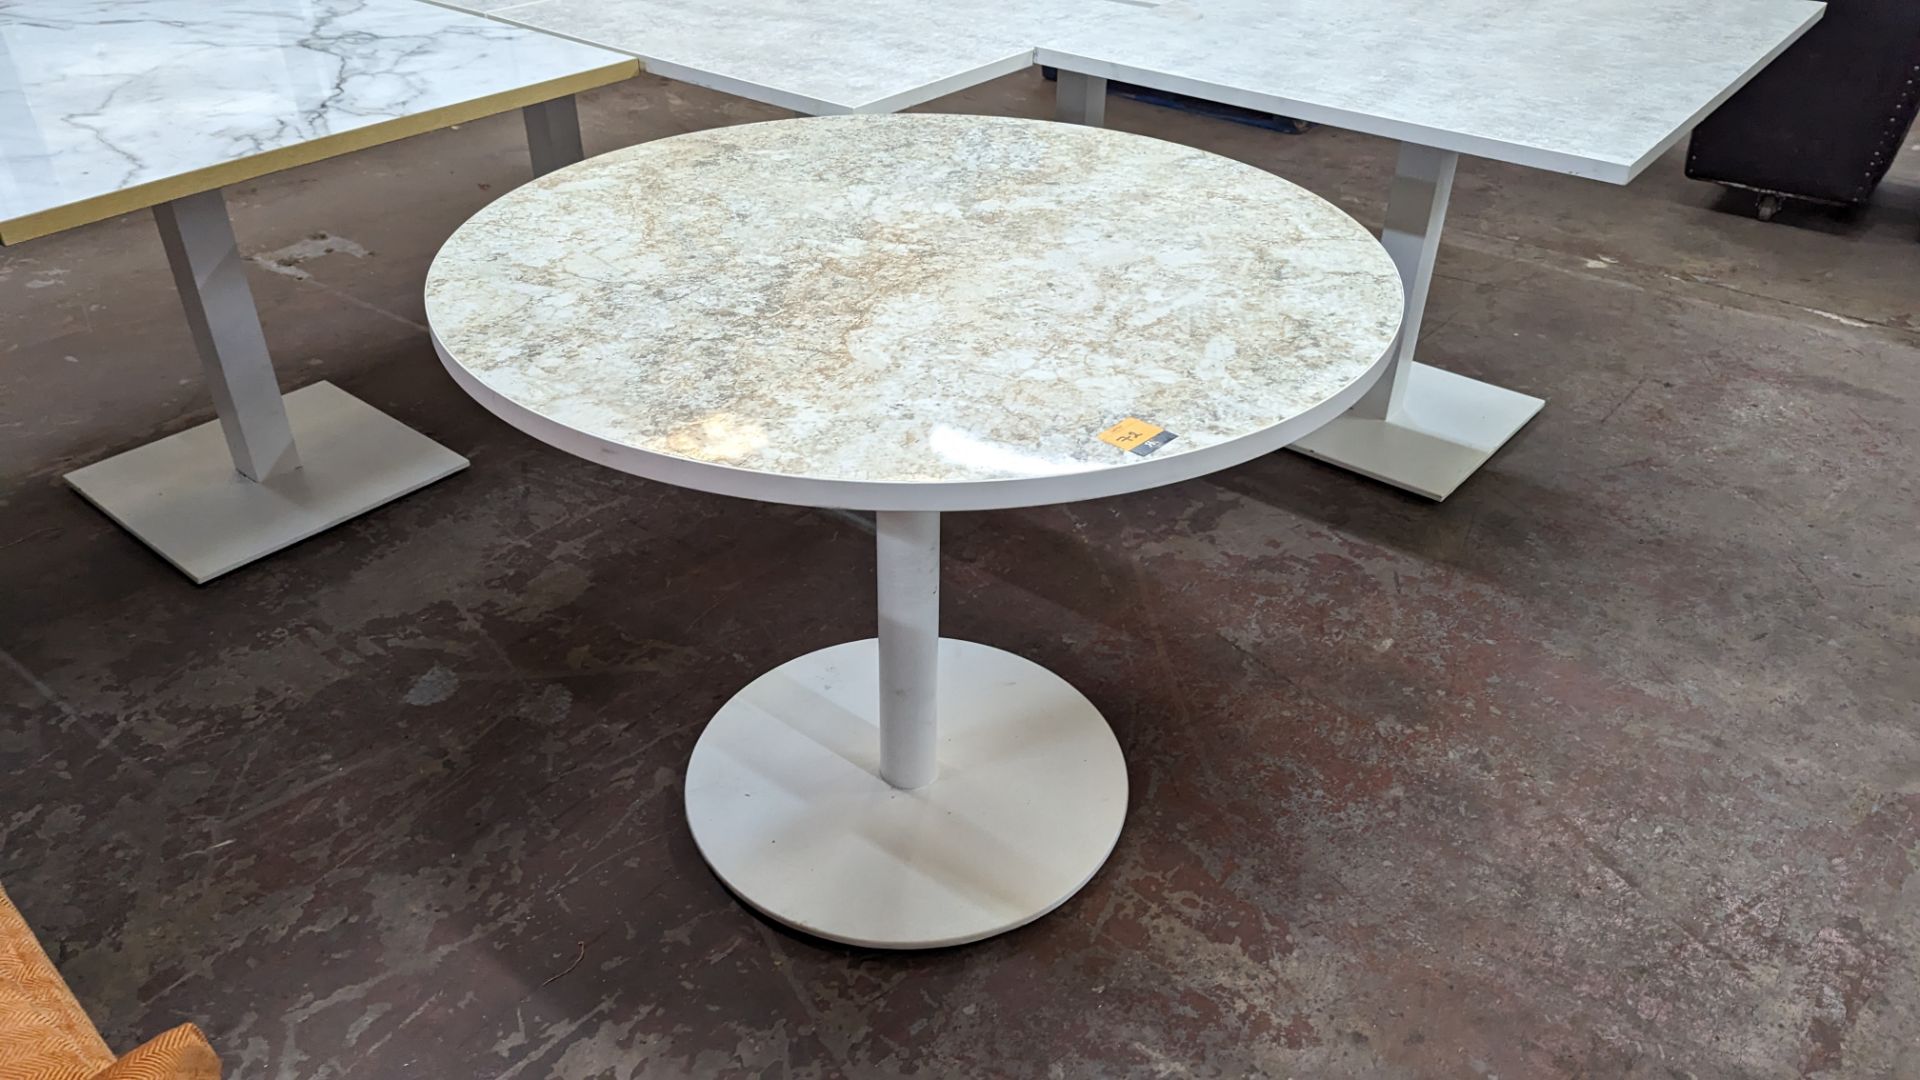 Single pedestal round dining table with marble effect top, approximately 1000mm diameter - Image 2 of 5